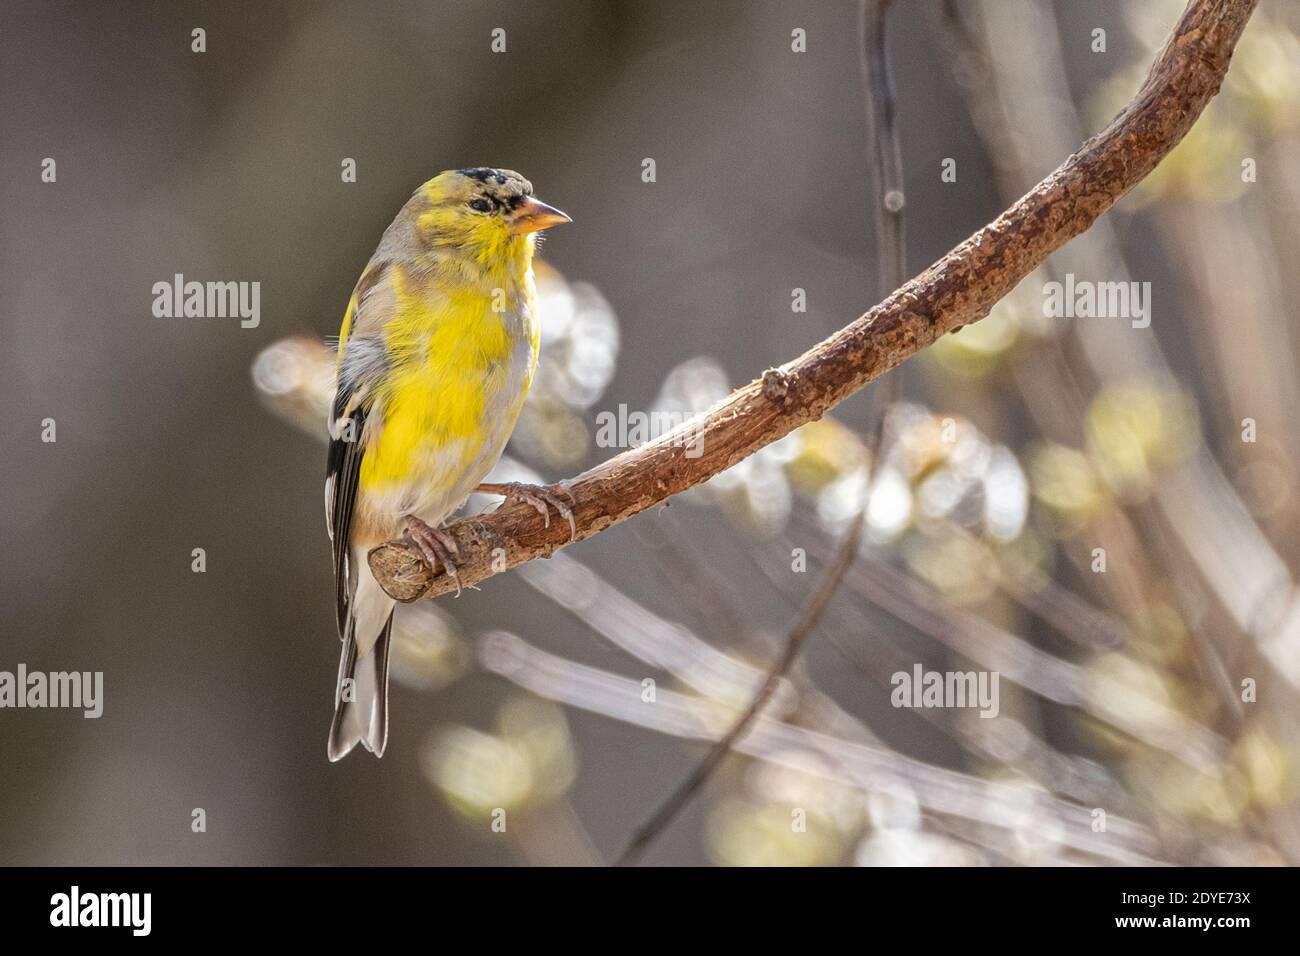 An American goldfinch sitting on a branch Stock Photo